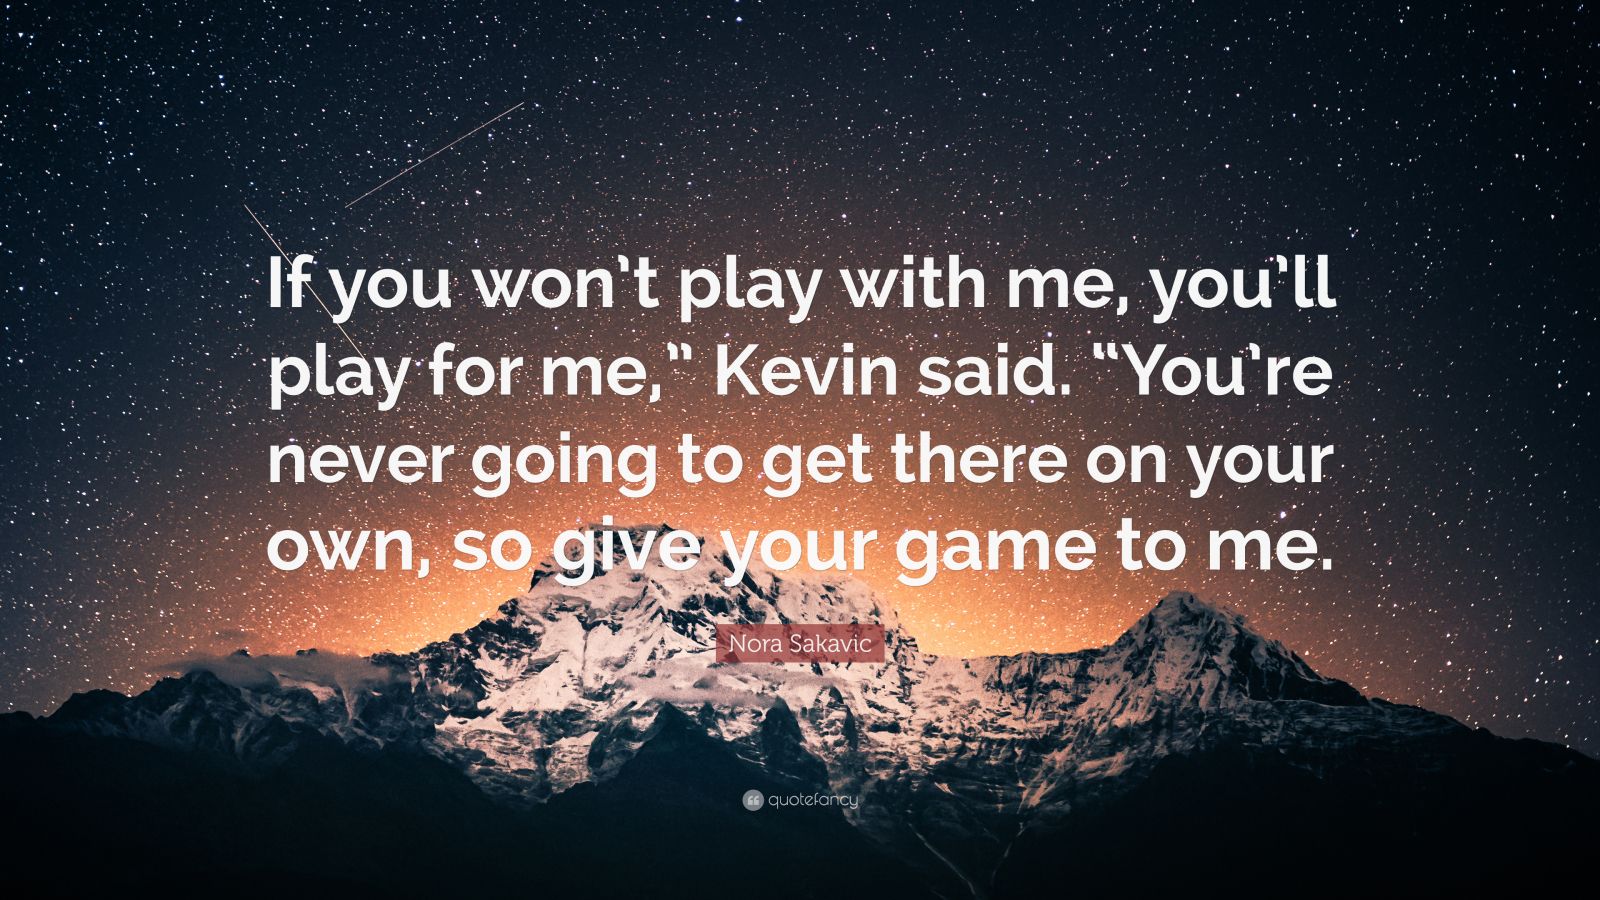 Nora Sakavic Quote: “If you won't play with me, you'll play for me